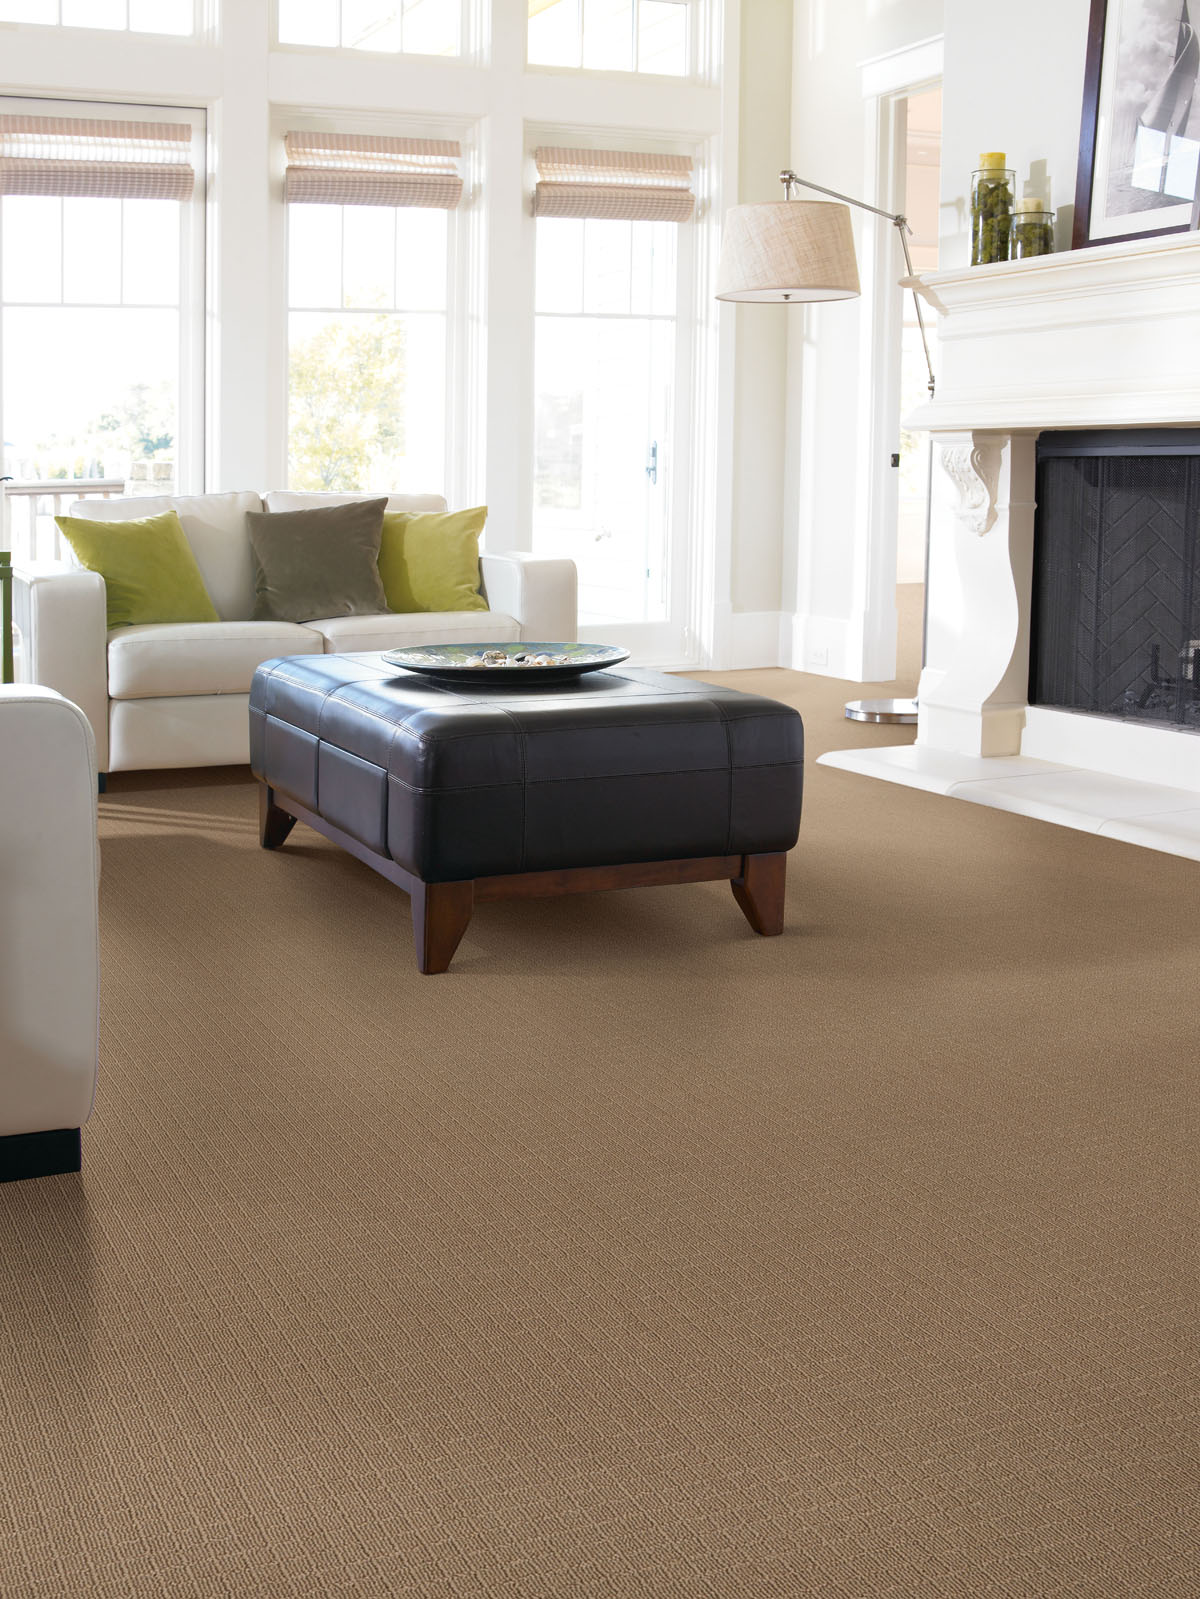 Is Berber Carpet Out of Style? in Indianapolis, IN - Tish Flooring